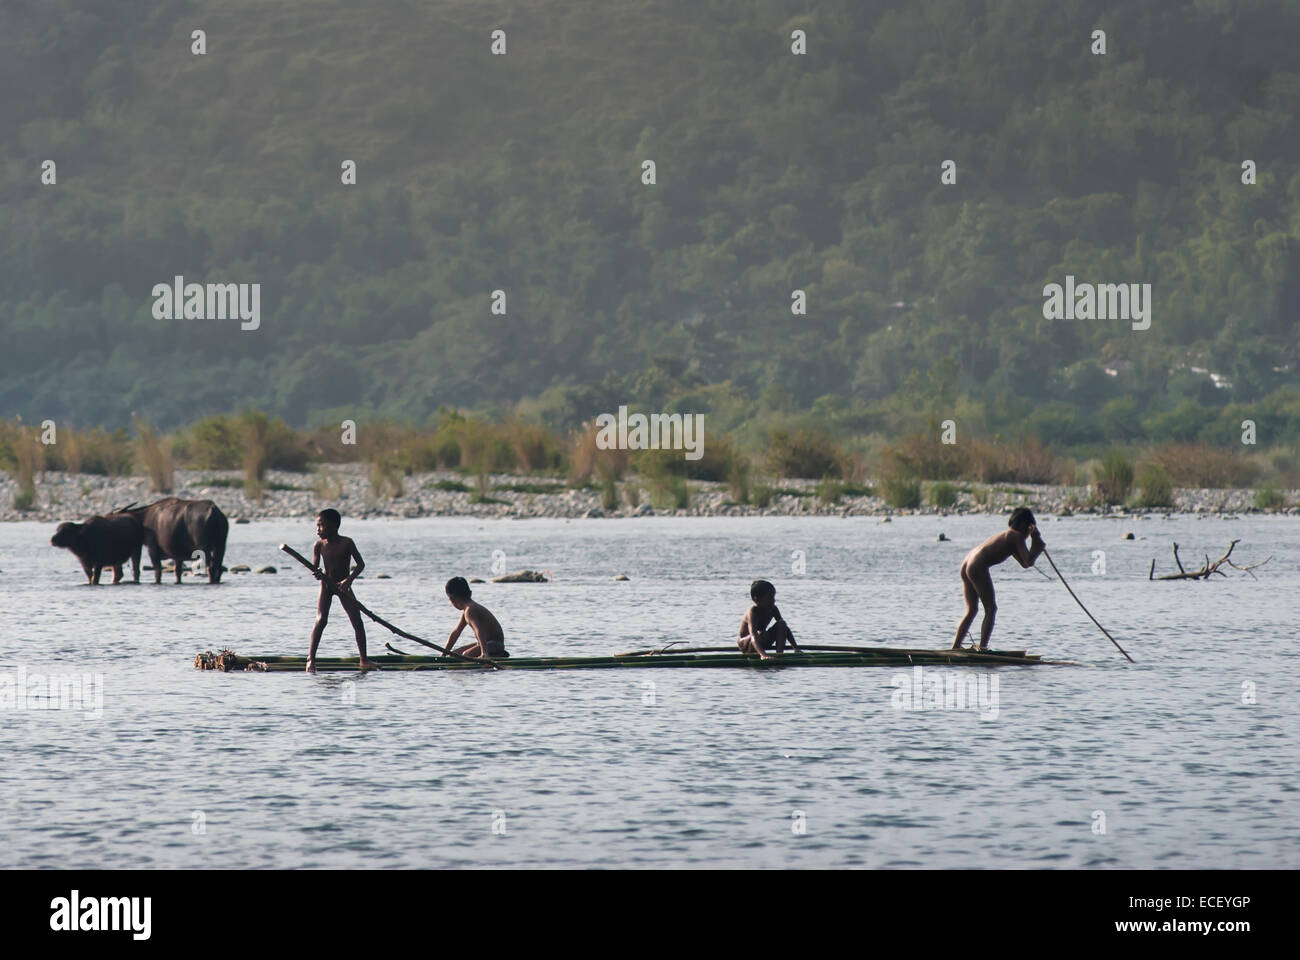 Indigenous boys pushing a bamboo raft on the Cagayan River in Luzon Stock Photo